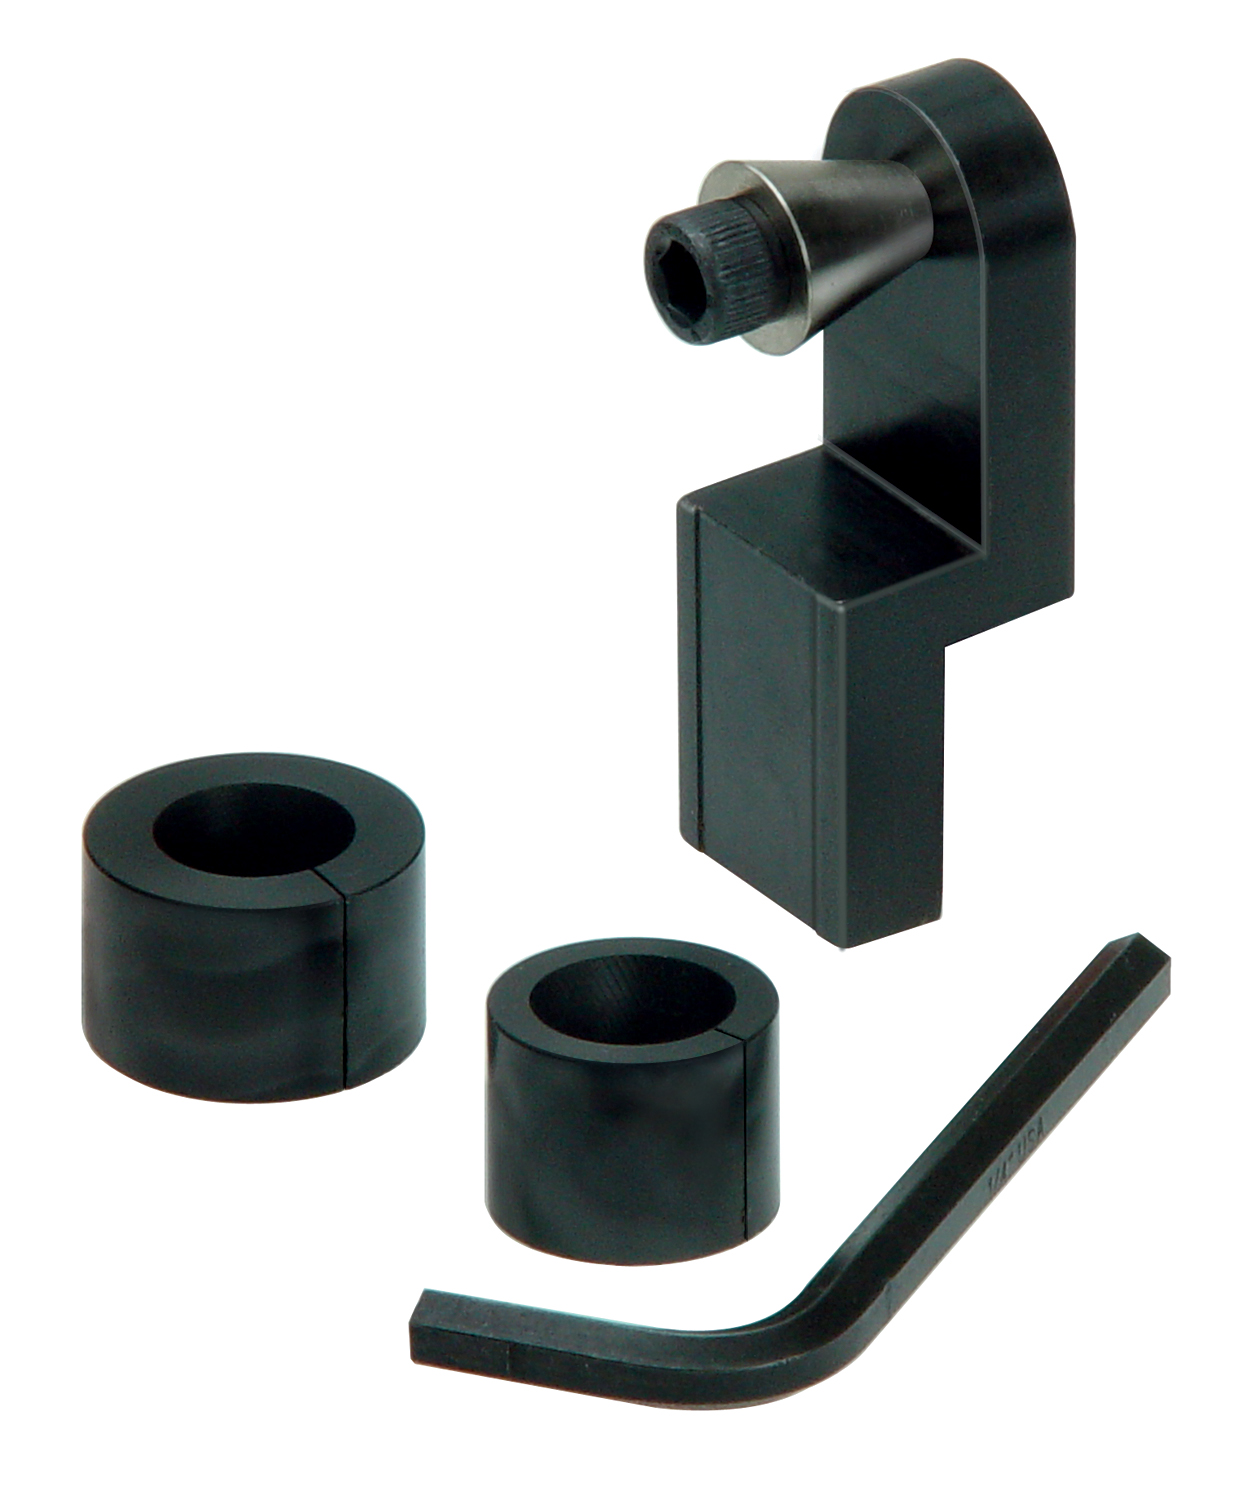 BenchMate ring holder set Scope for vices and engraver's cushions